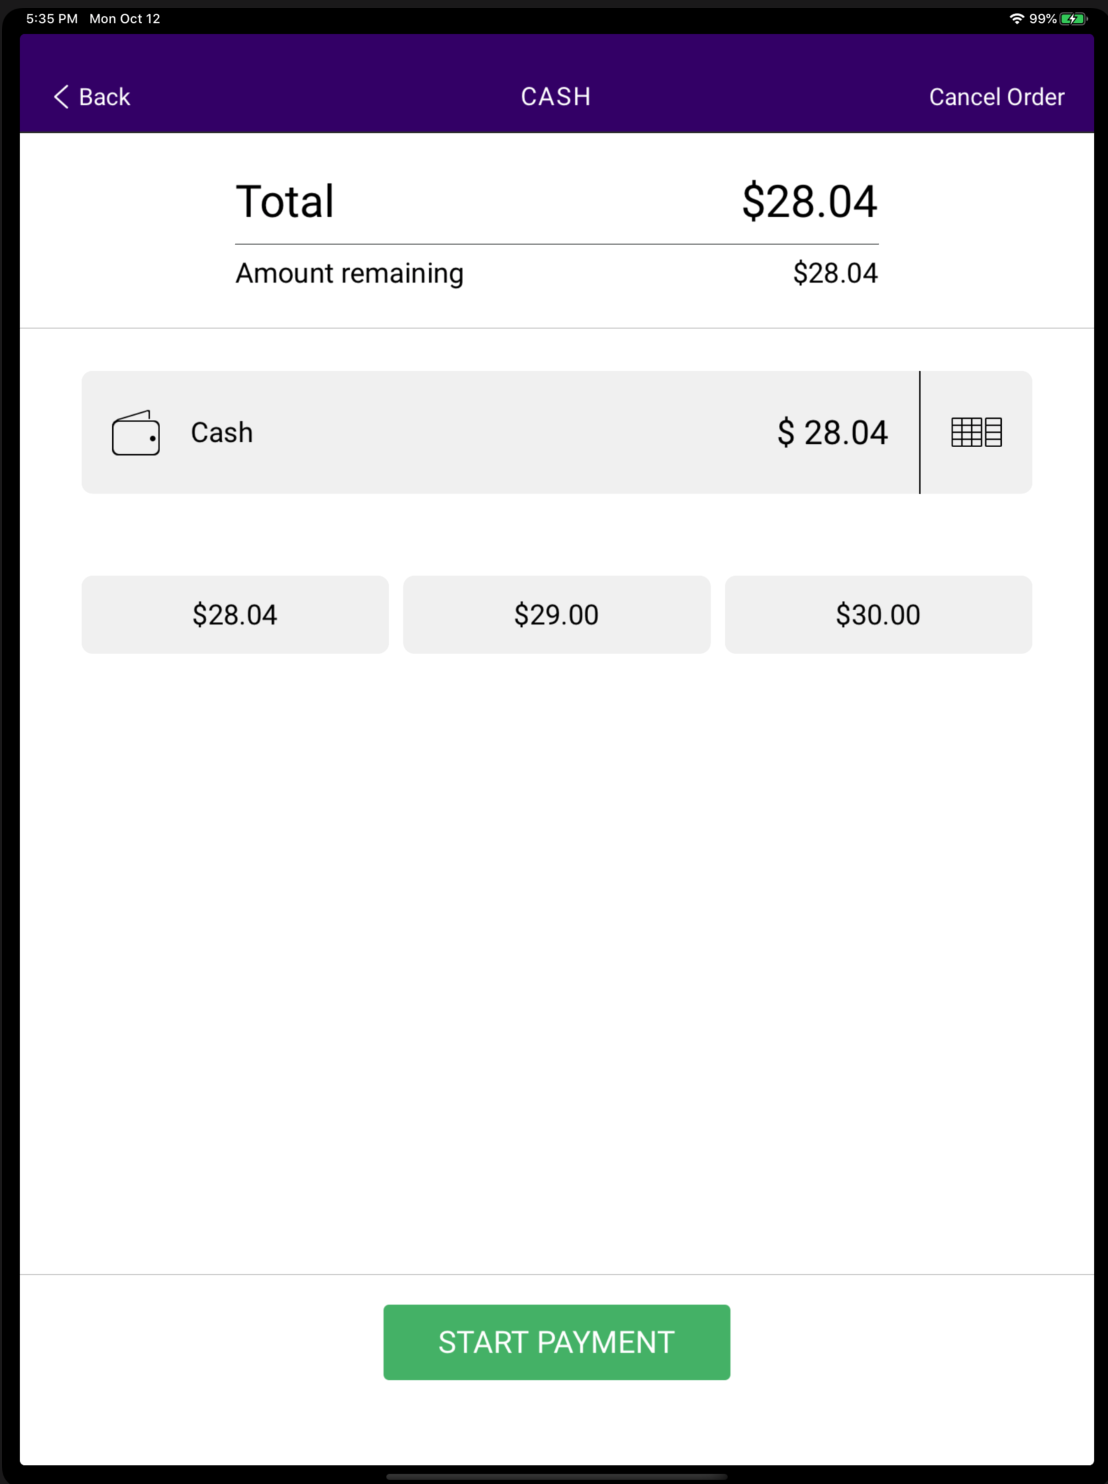 The checkout page prompting the user to input payment details